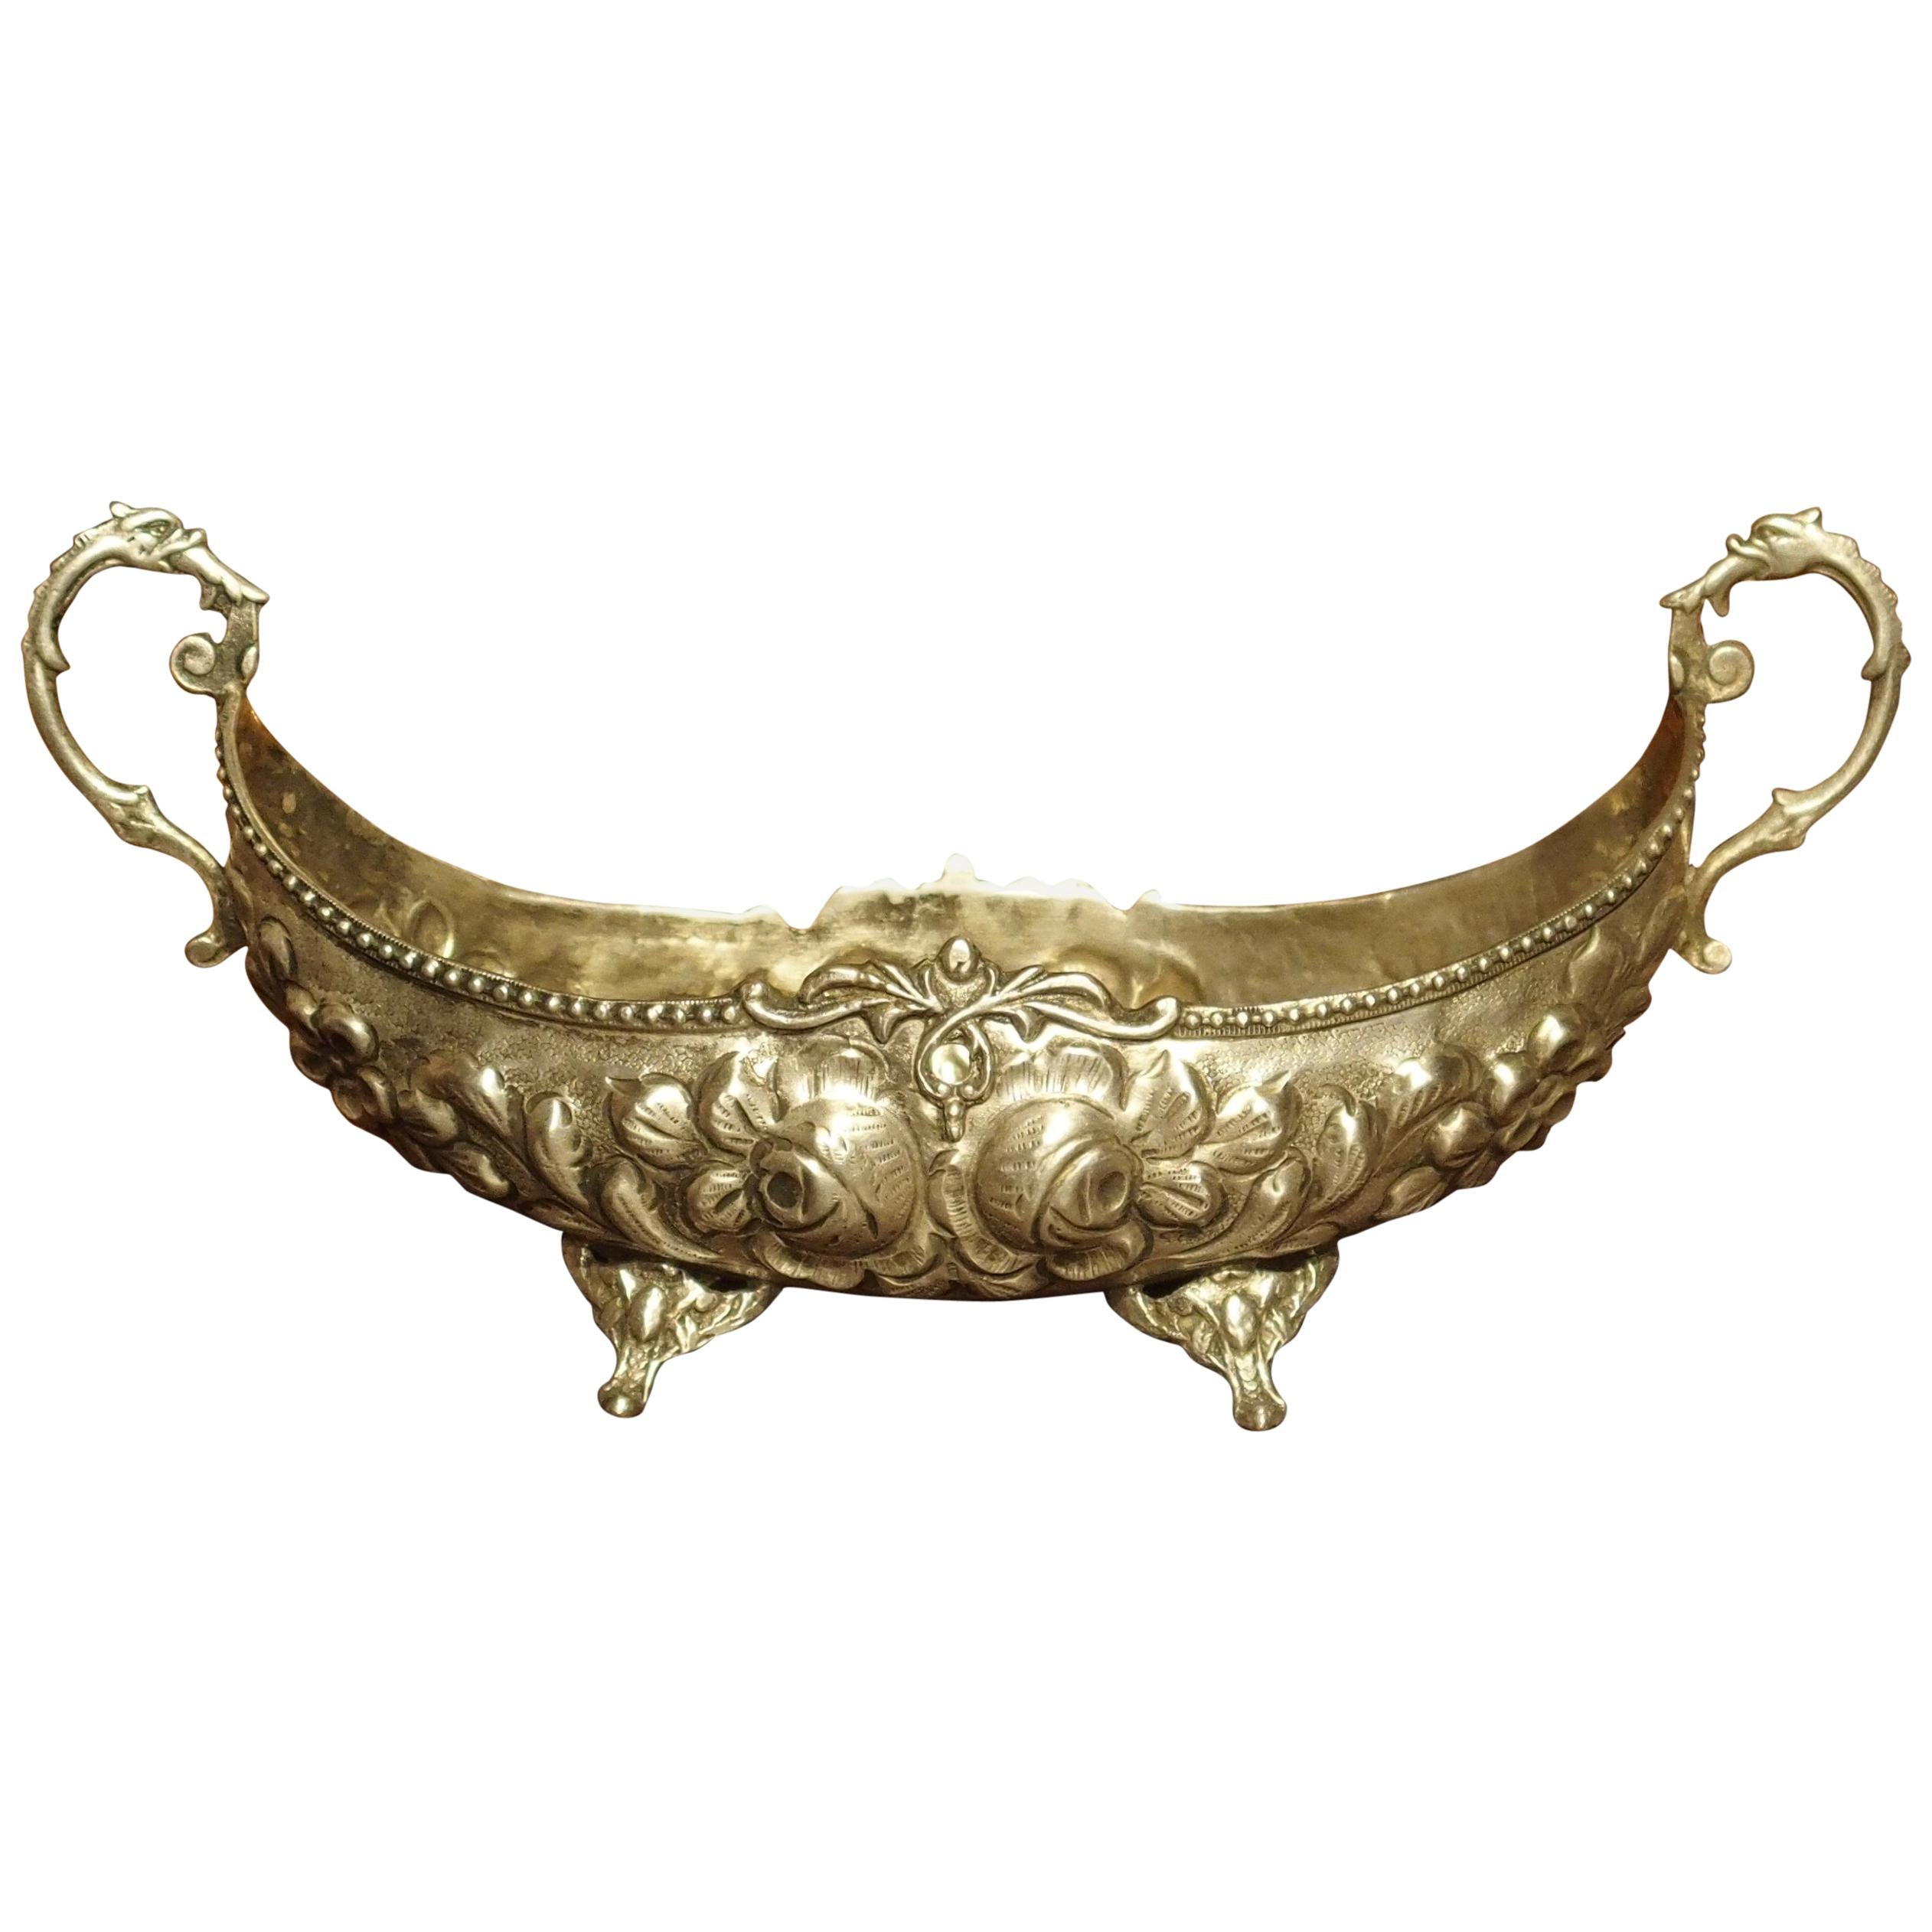 Small Antique Silver Gondola Form Serving Bowl from Germany, circa 1900